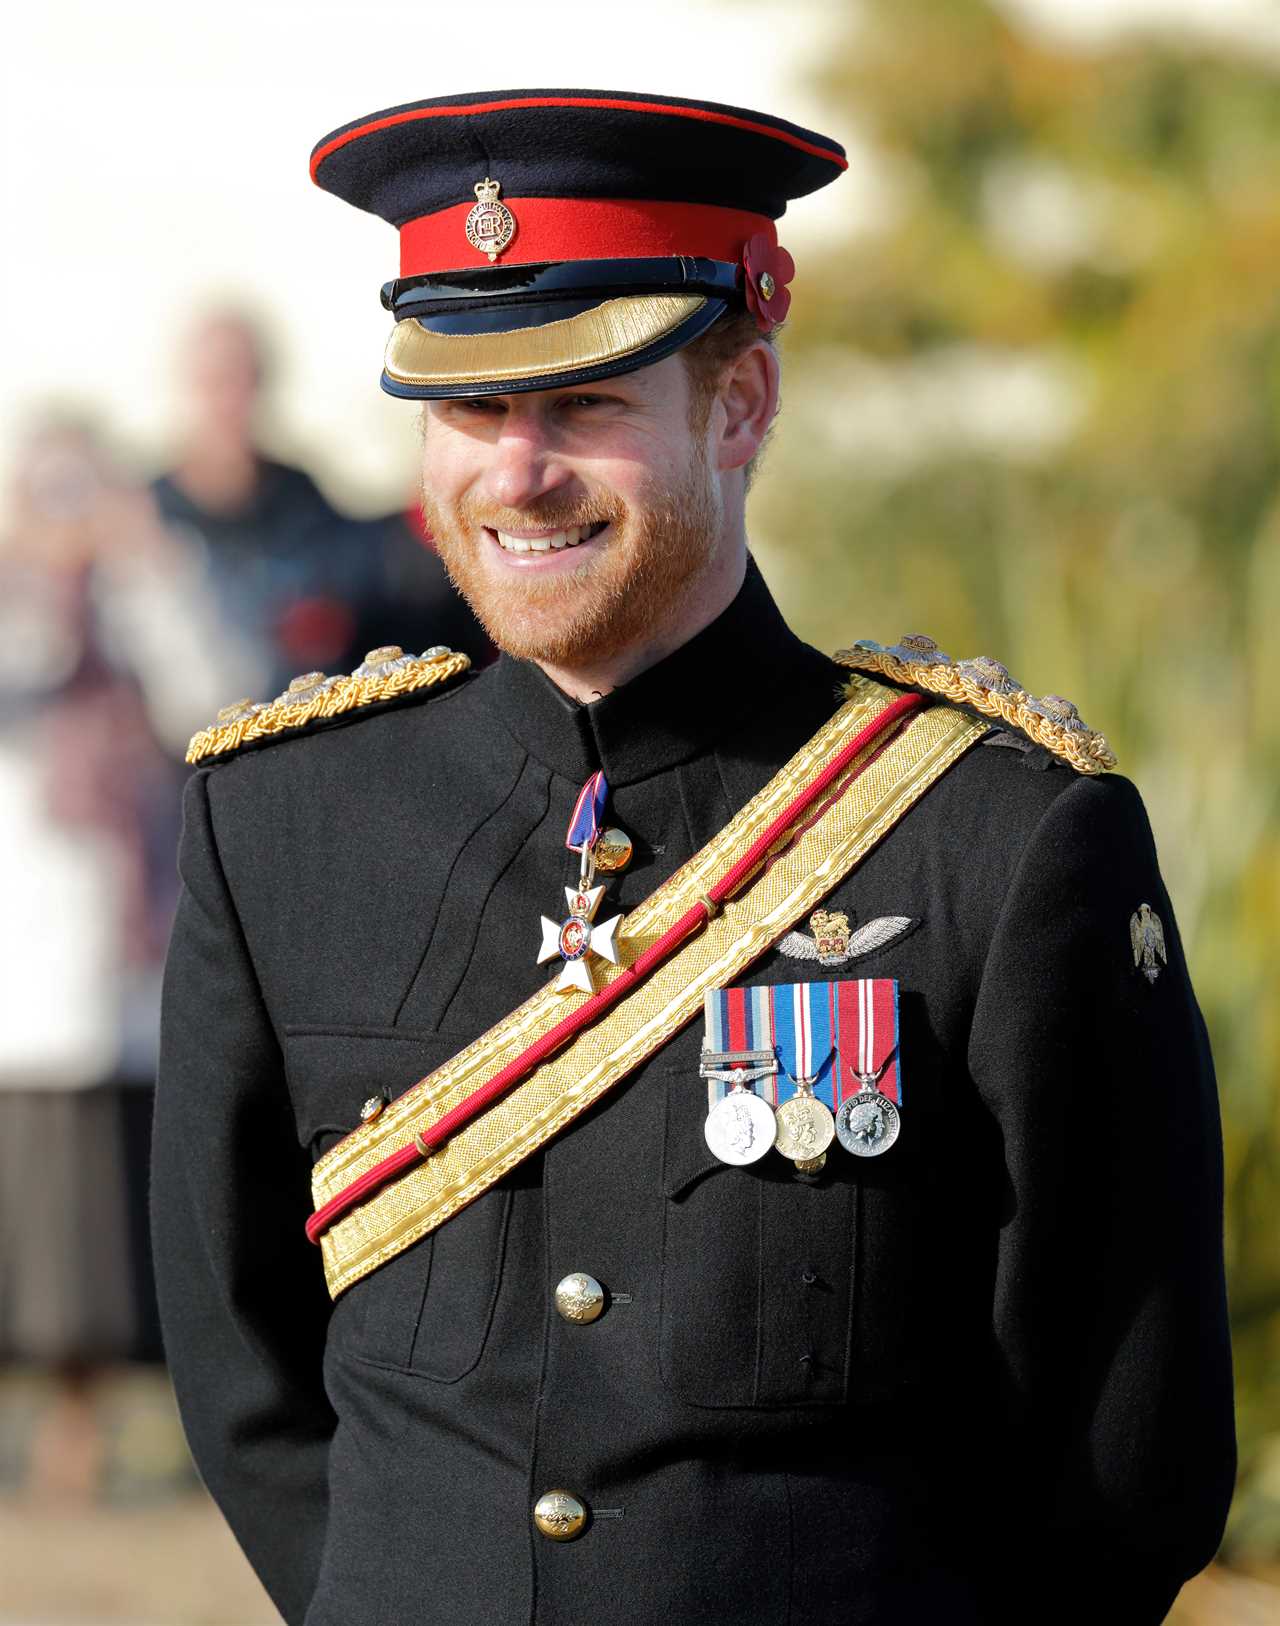 Prince Harry could be taking home a gong